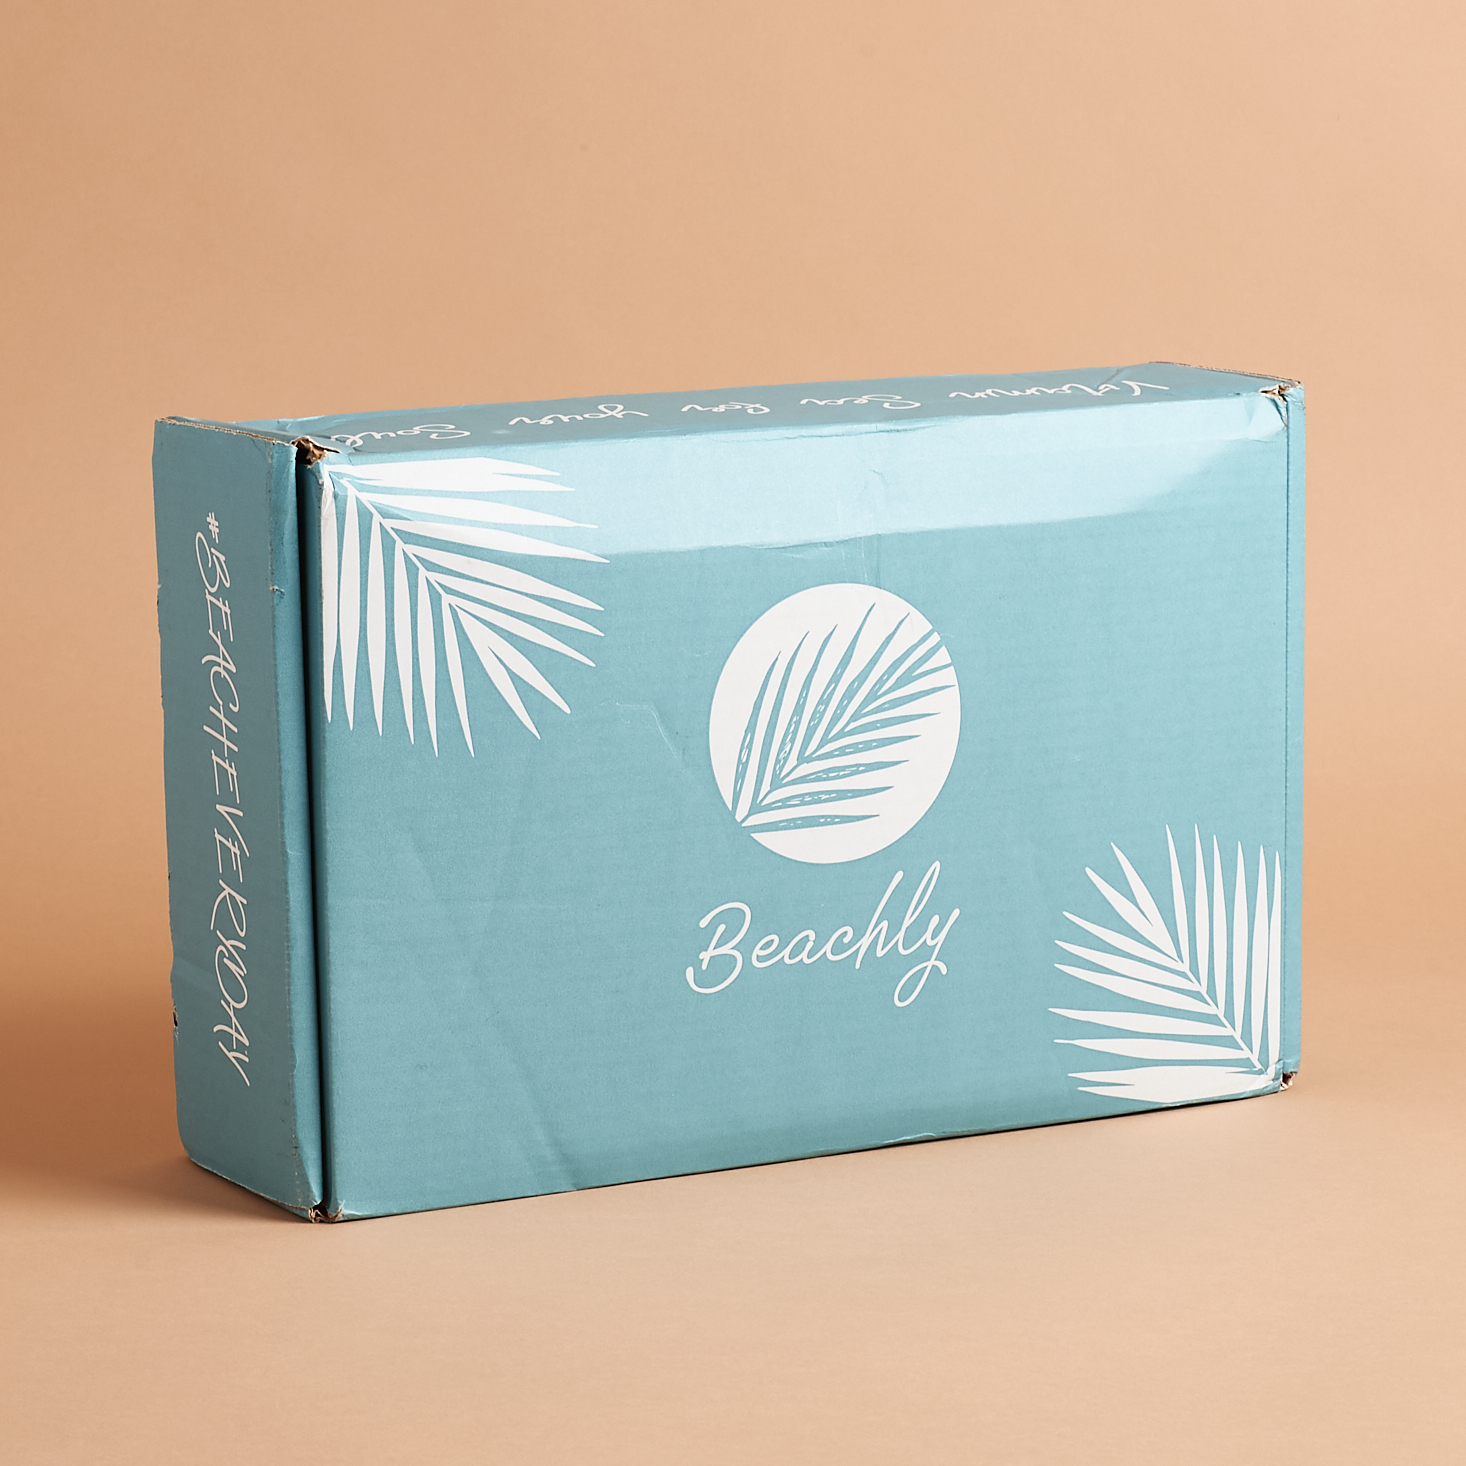 Beachly Summer 2021 Box: Full Spoilers + Coupon